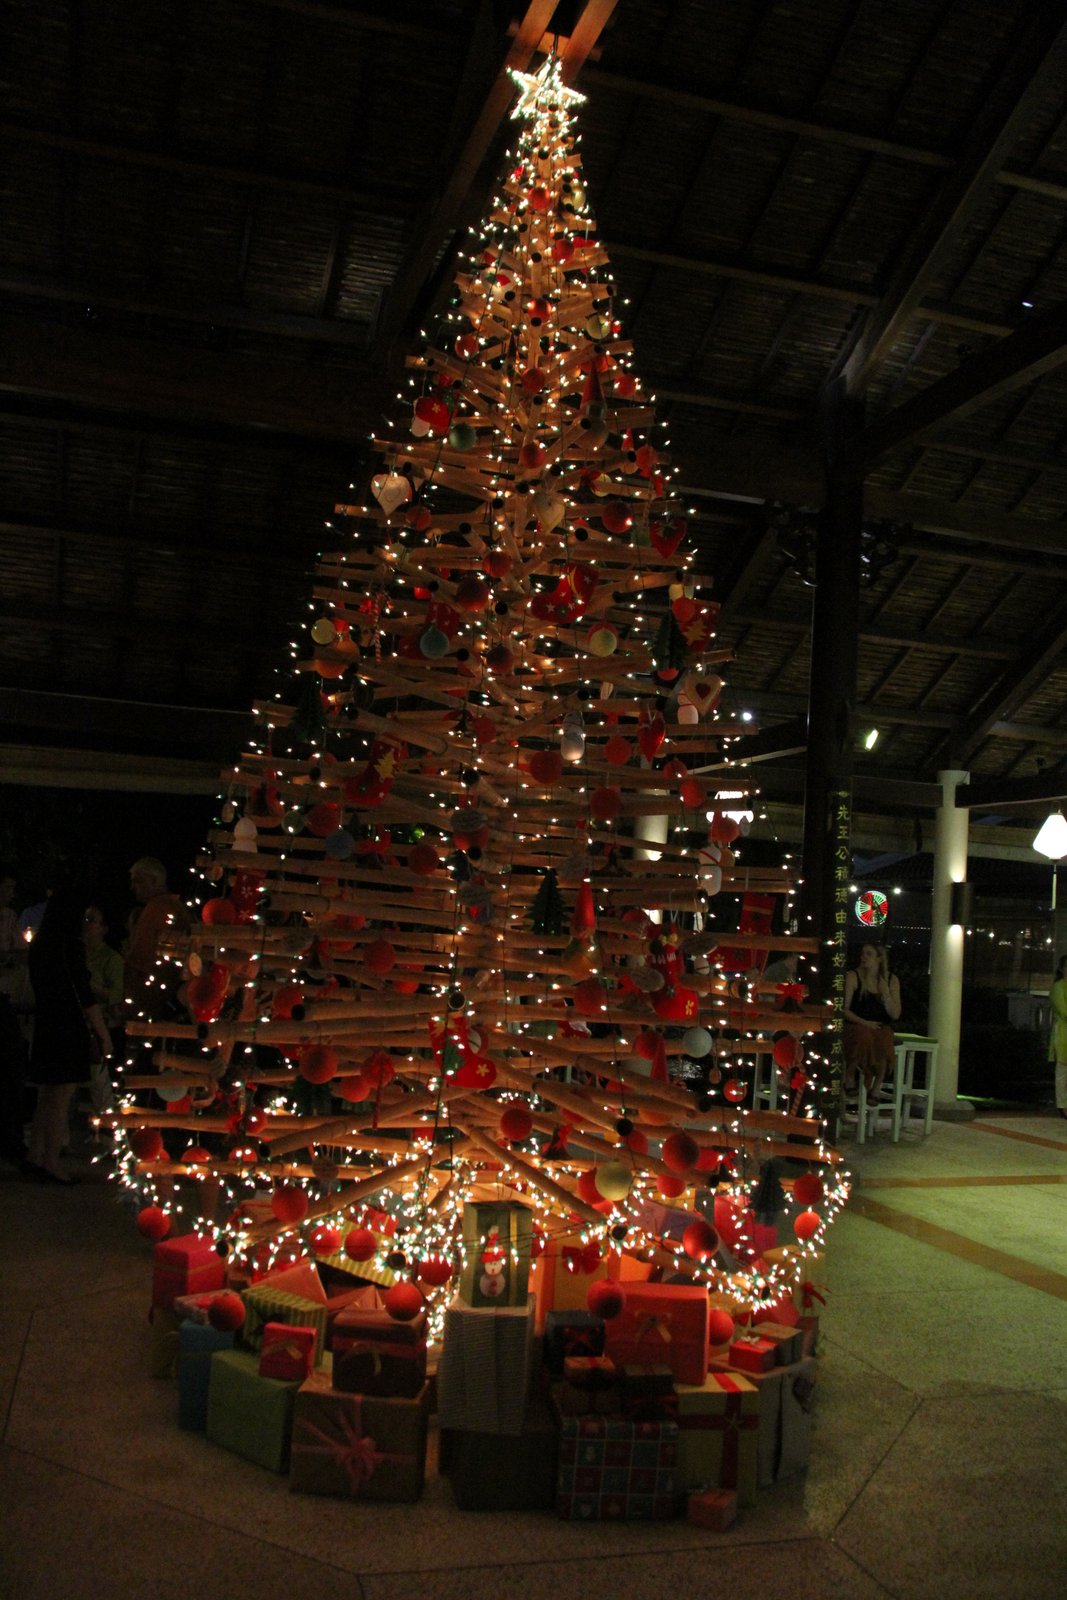 Christmas tree is made of waste items as a message for environmental protection